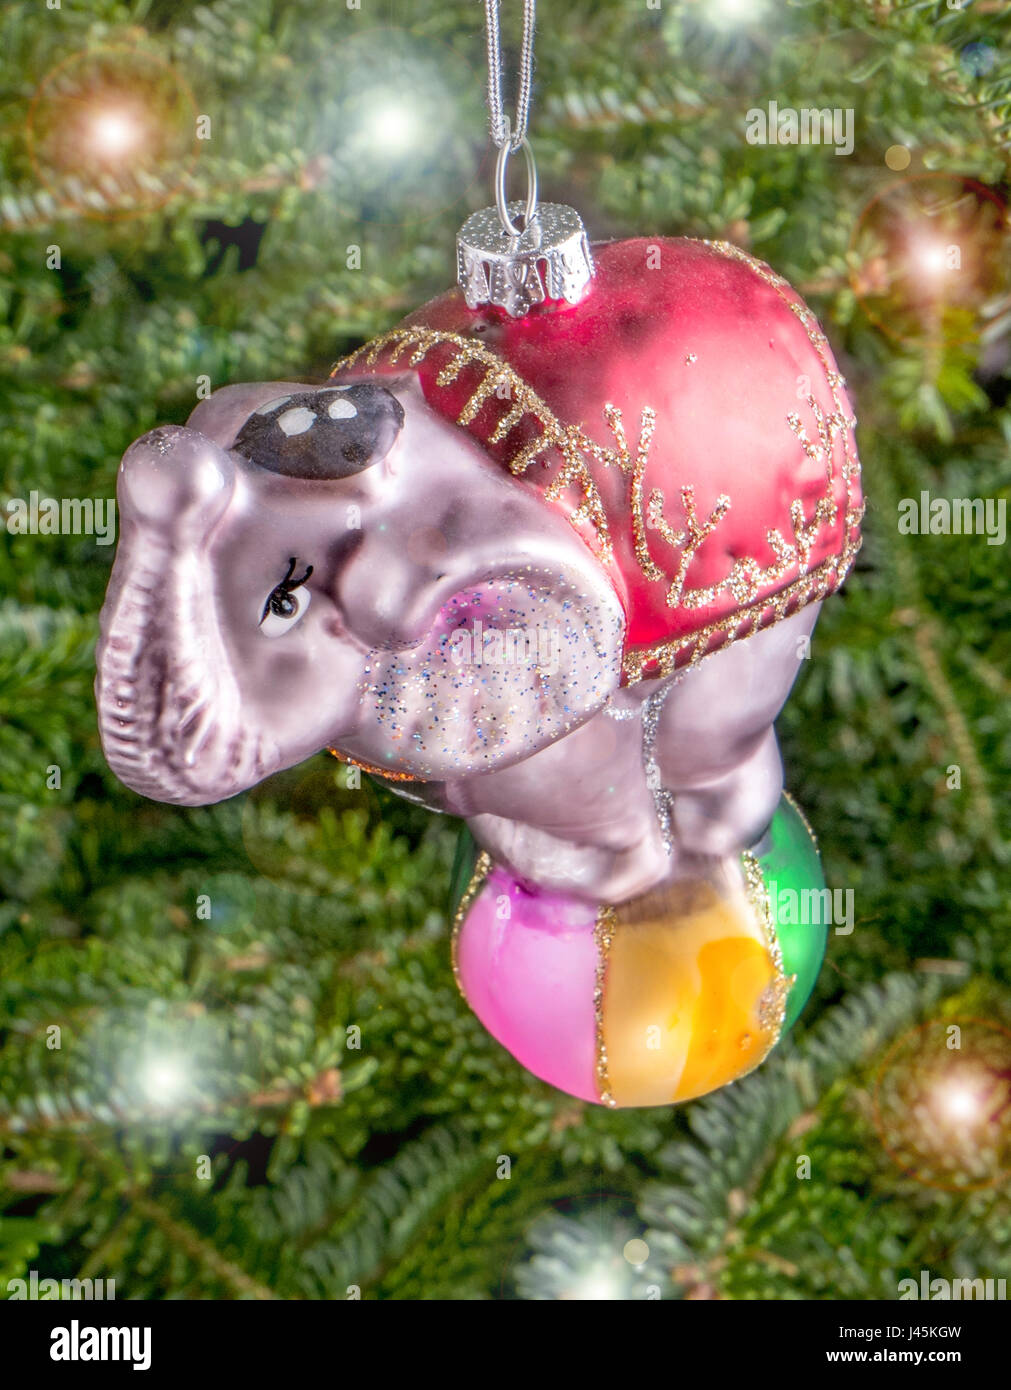 Christmas bauble hanging from a tree in the shape of a Circus Elephant balancing on a Ball Stock Photo